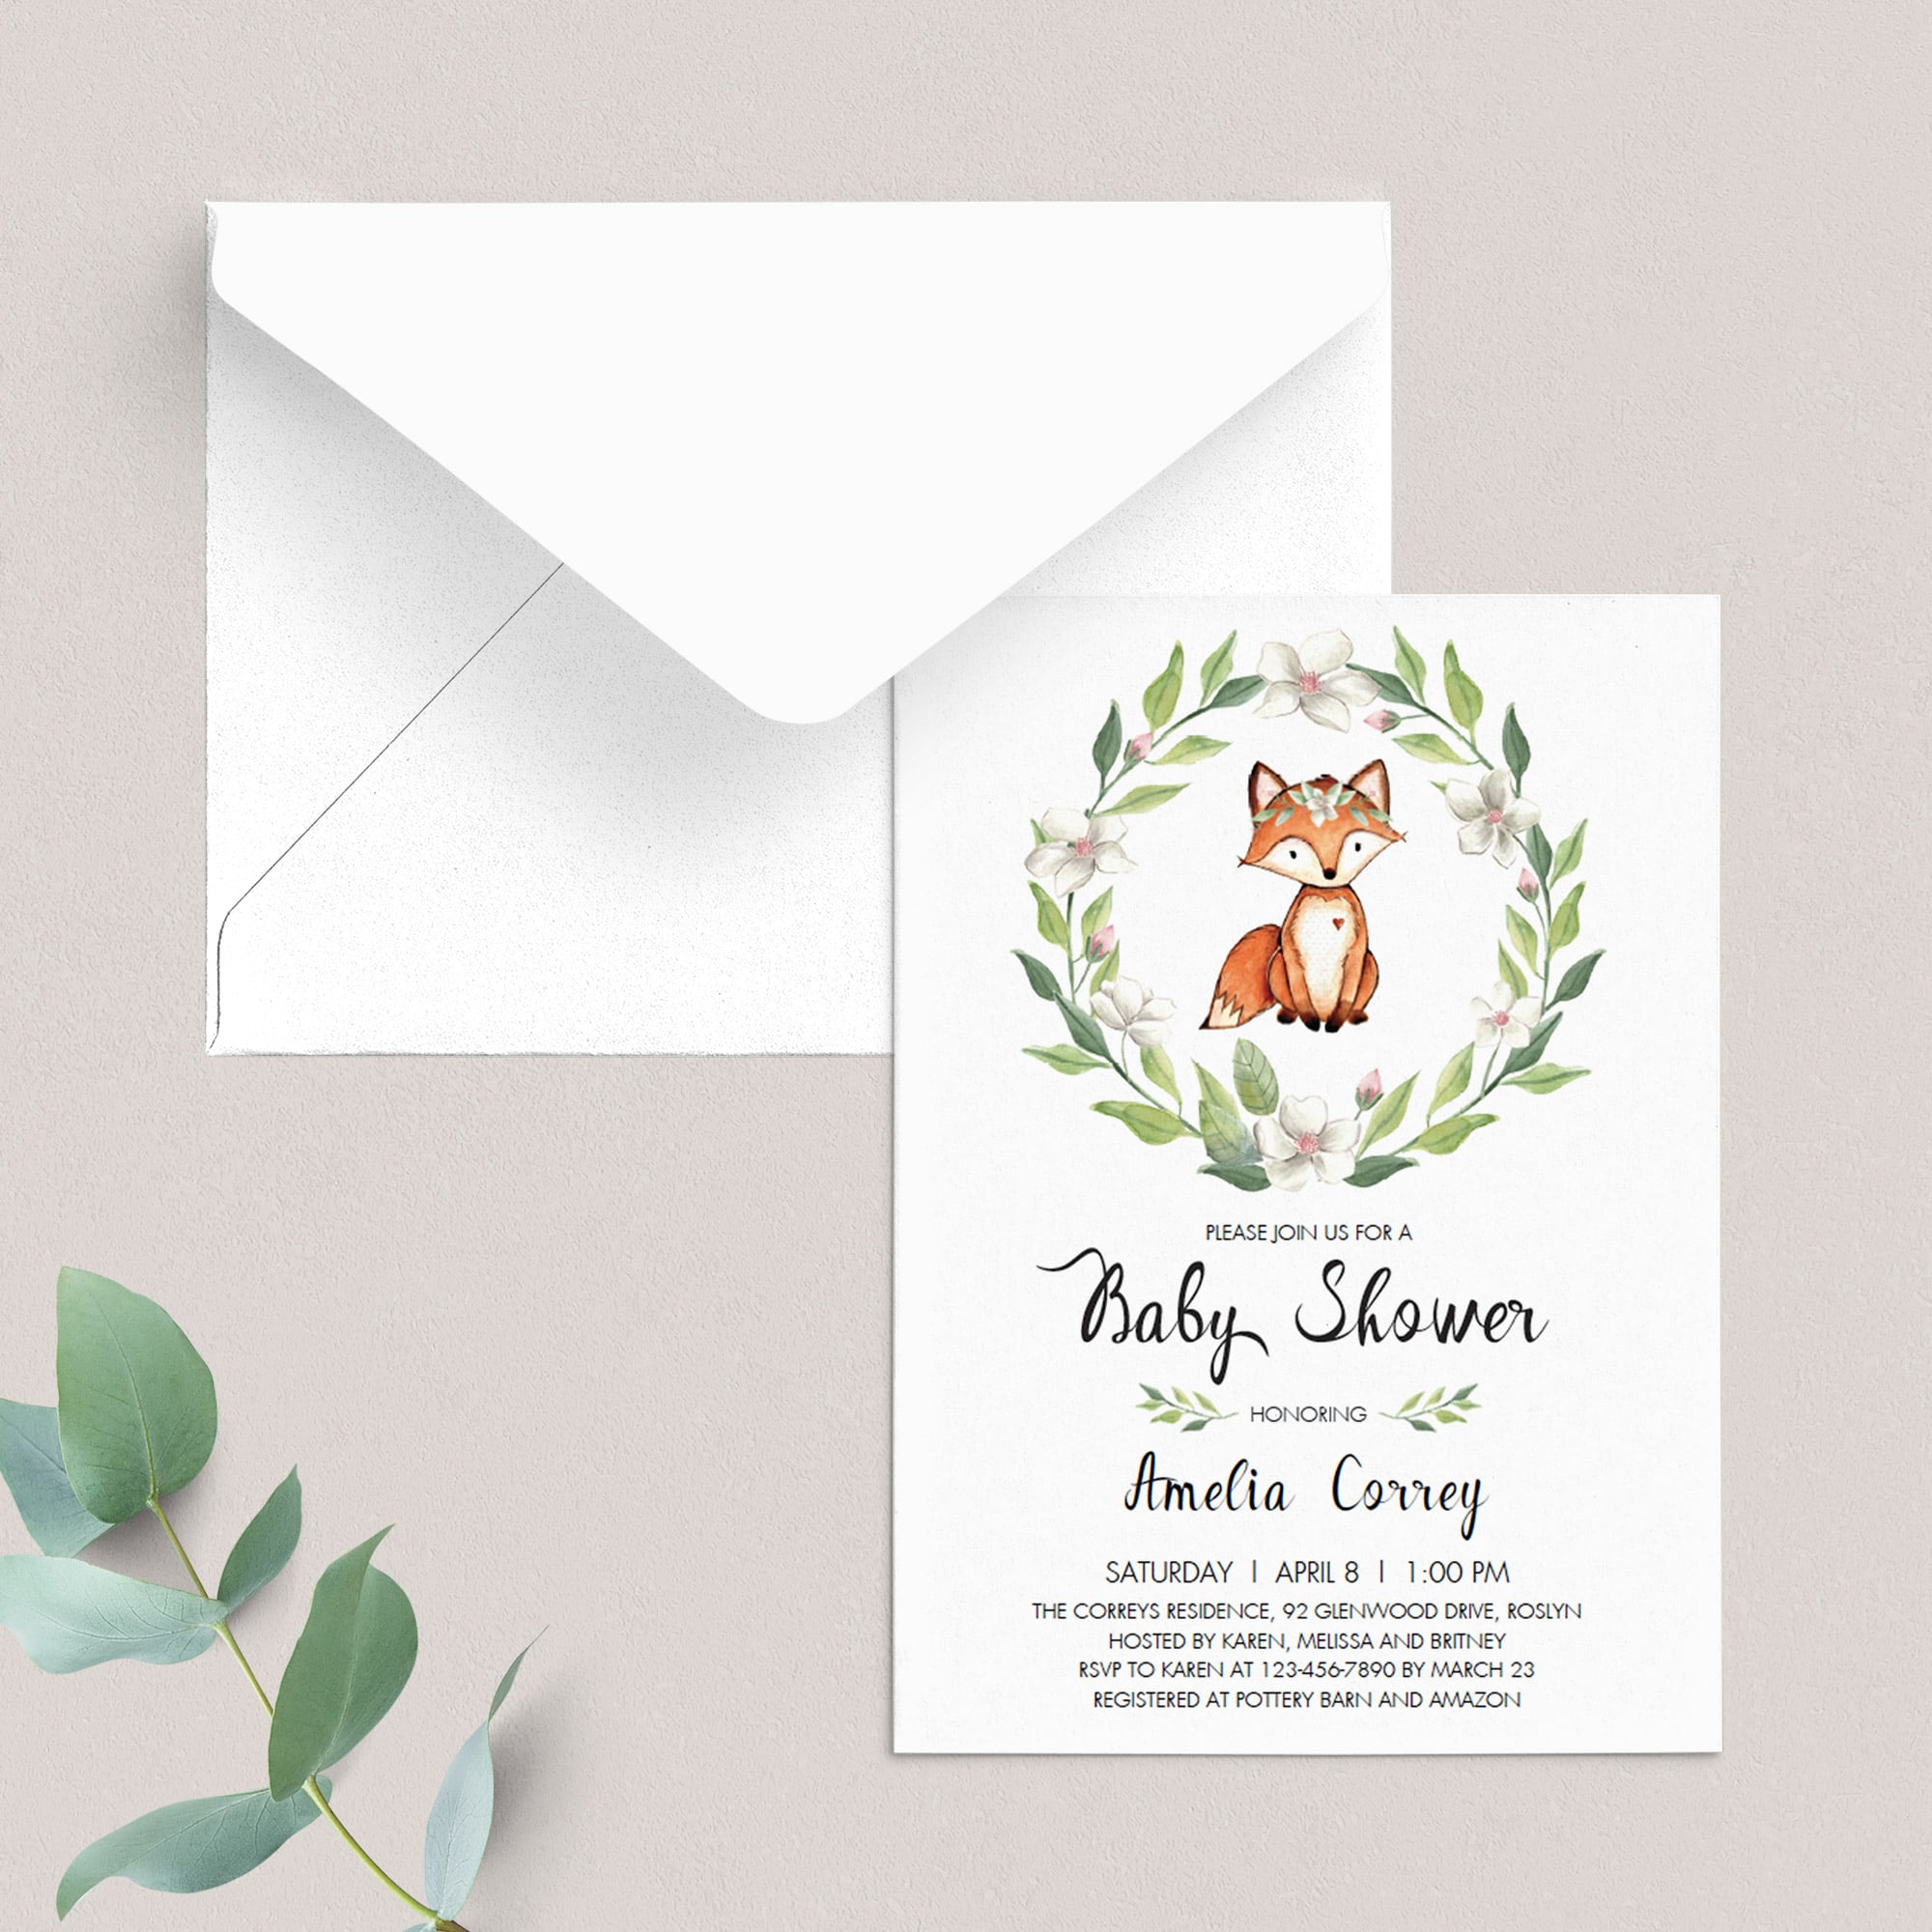 Fox baby shower invitation template by LittleSizzle